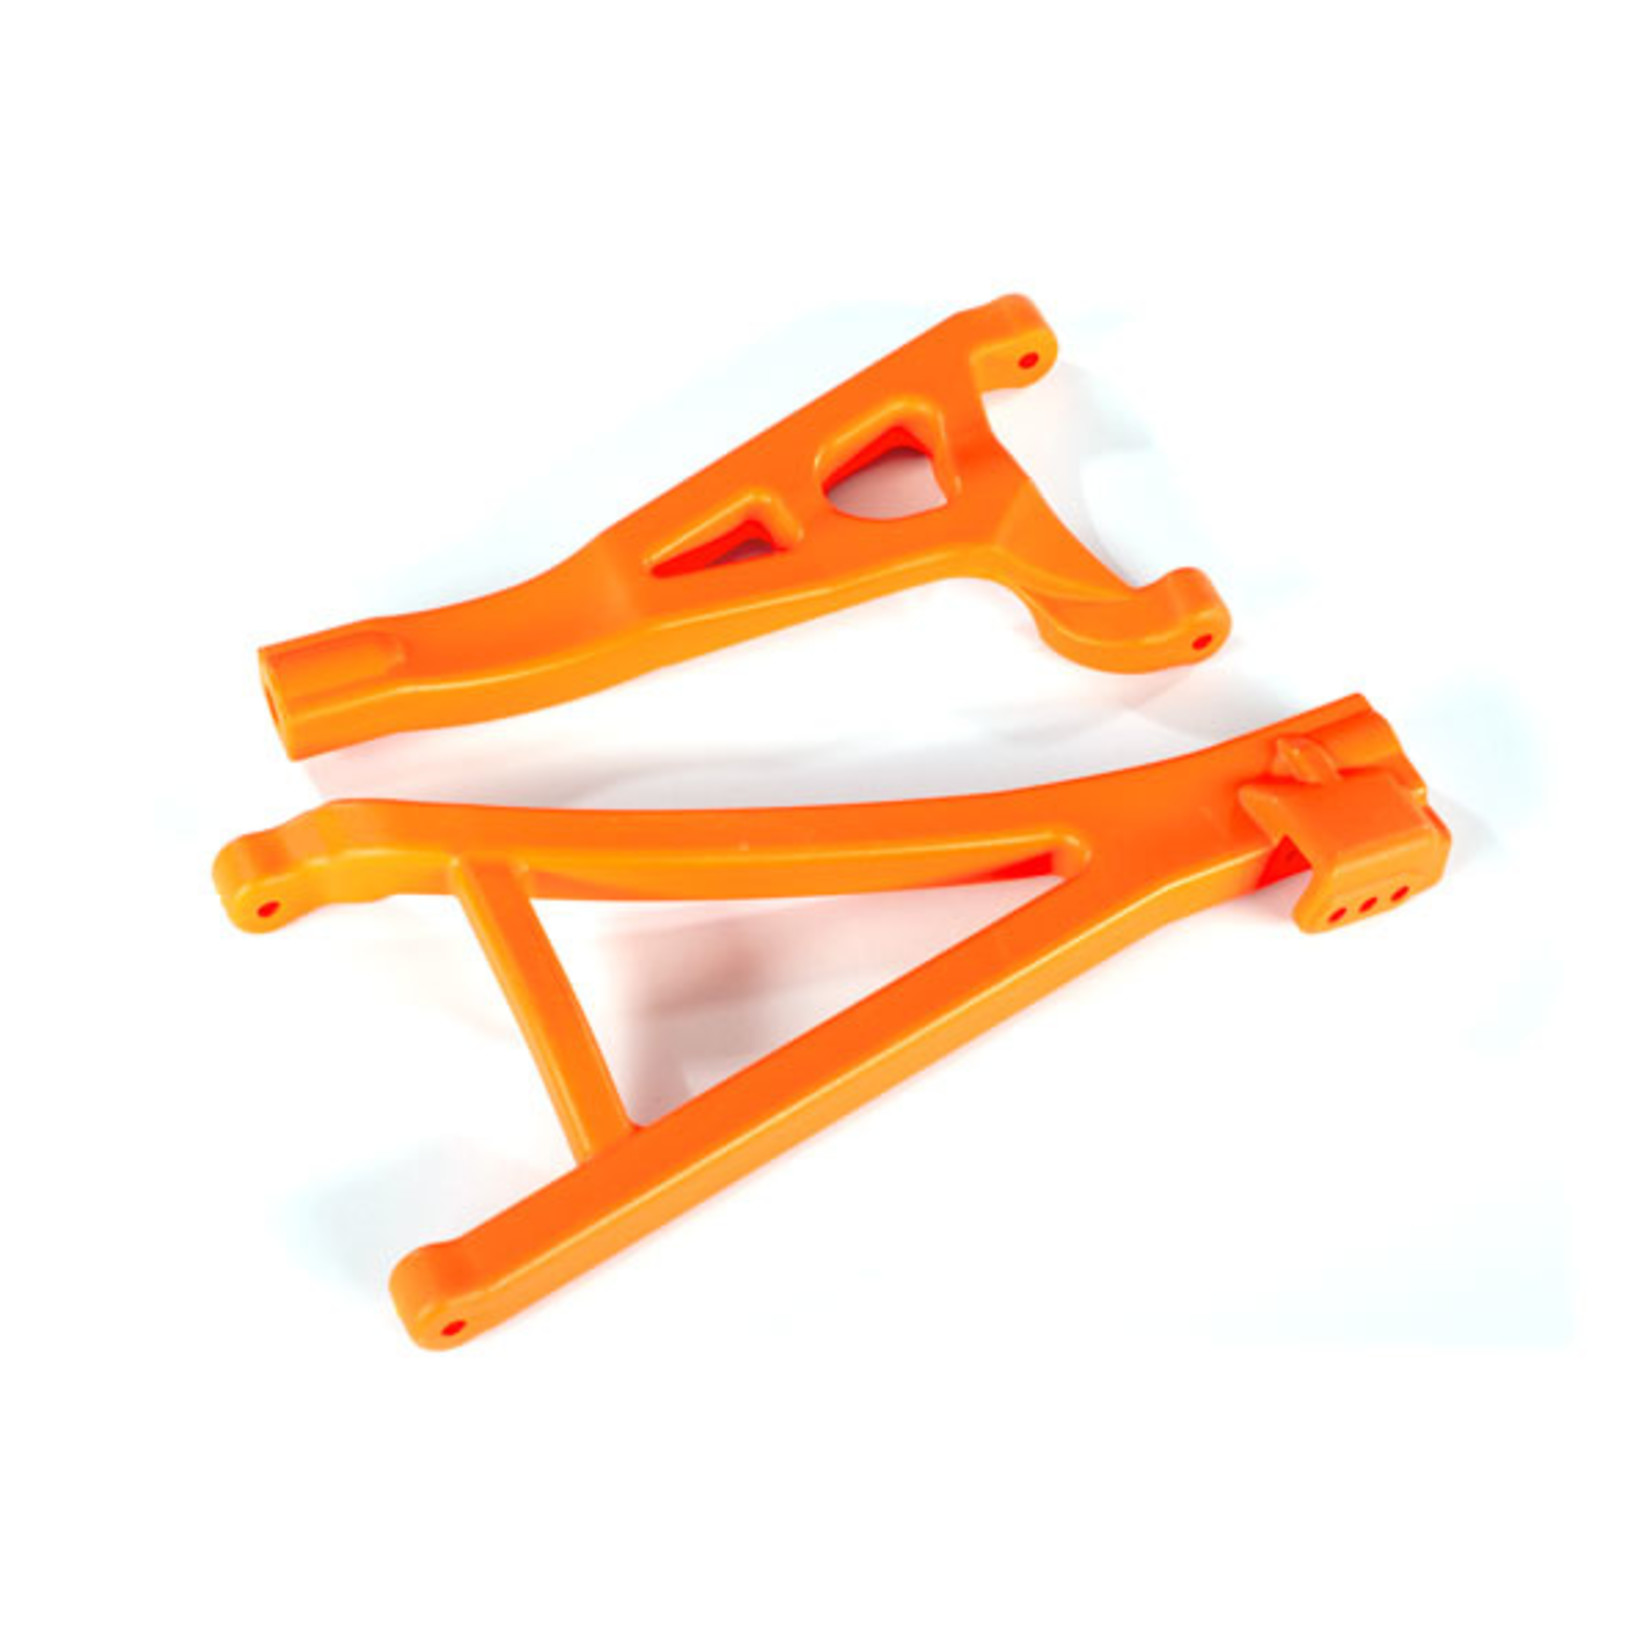 Traxxas 8631T - Suspension arms, orange, front (right), he